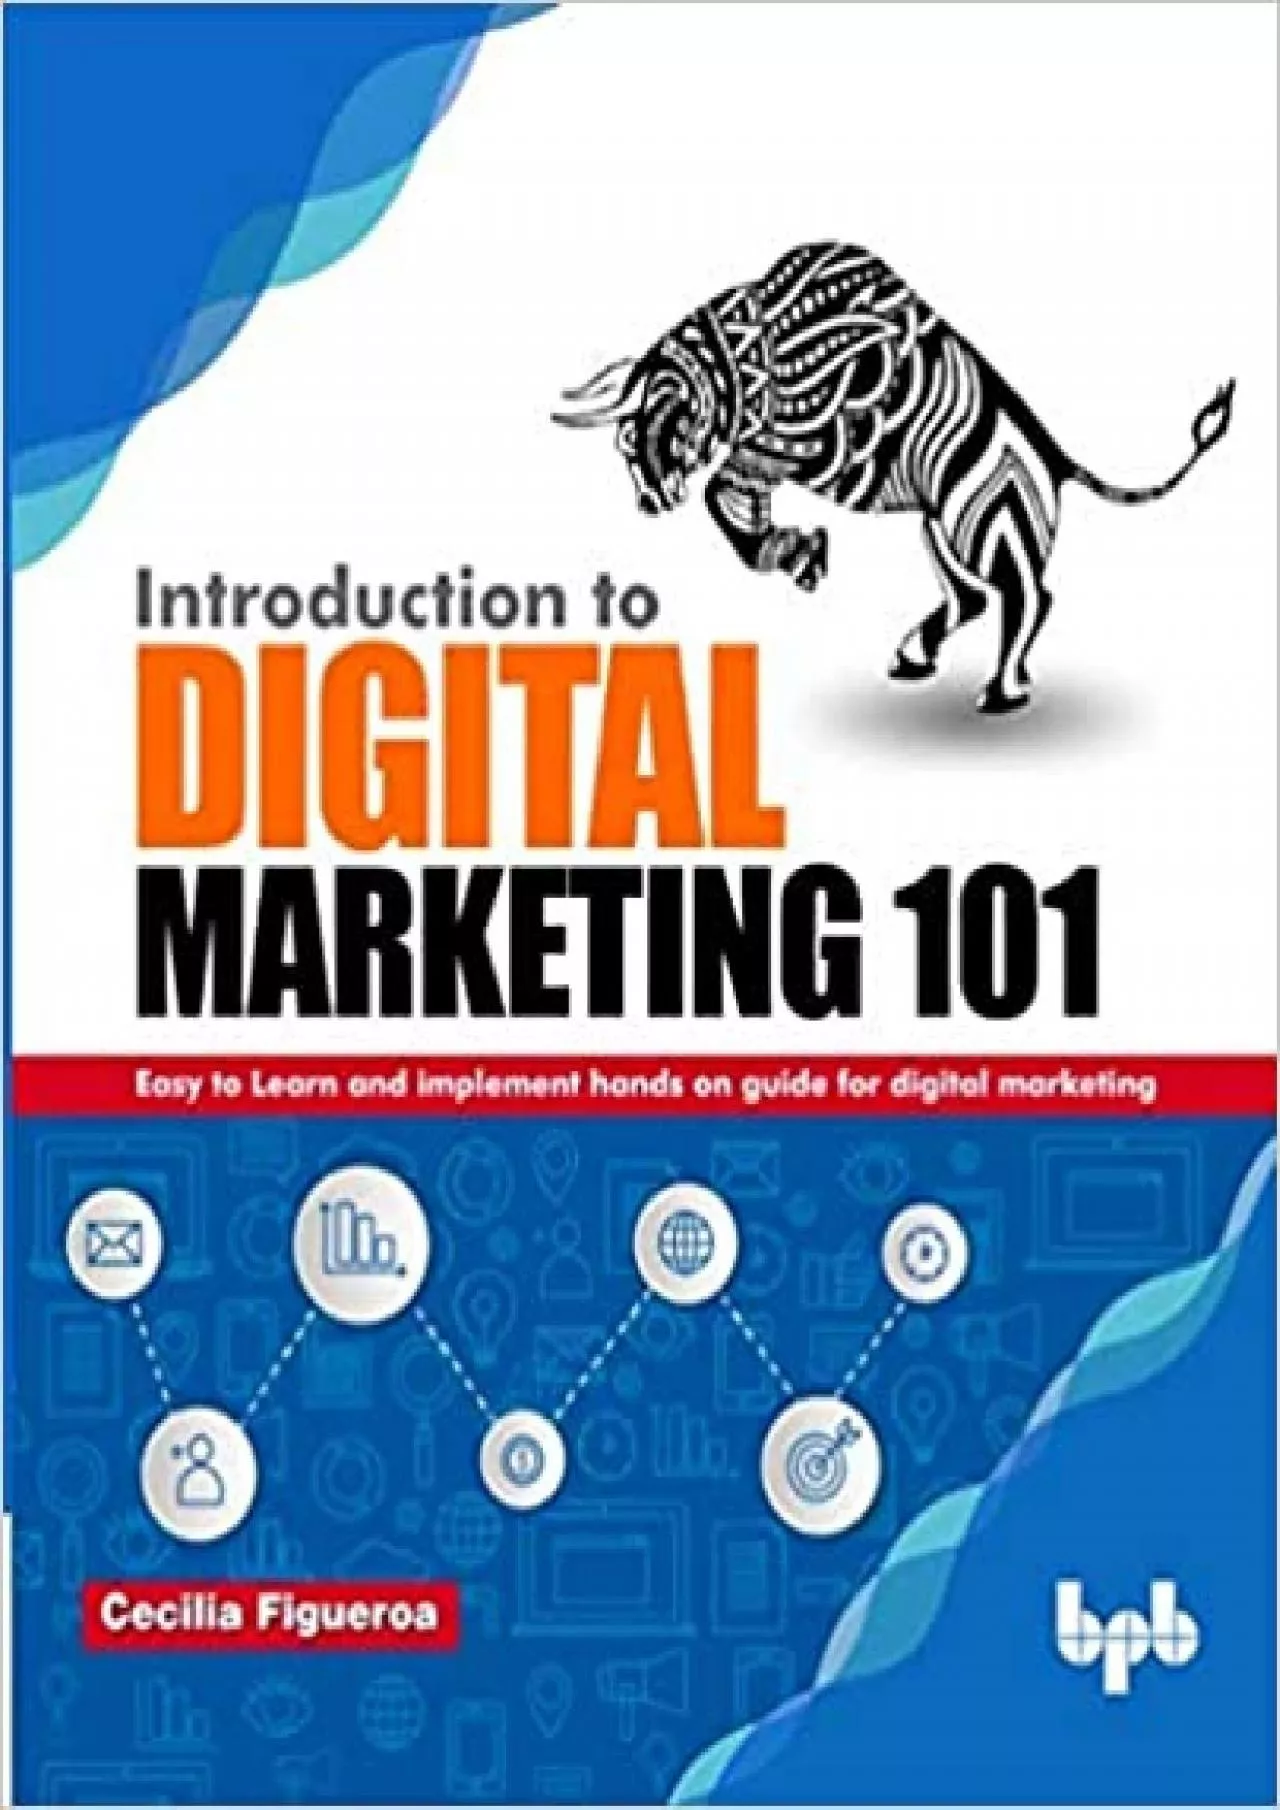 Introduction to Digital Marketing 101 Easy to Learn and implement hands on guide for Digital